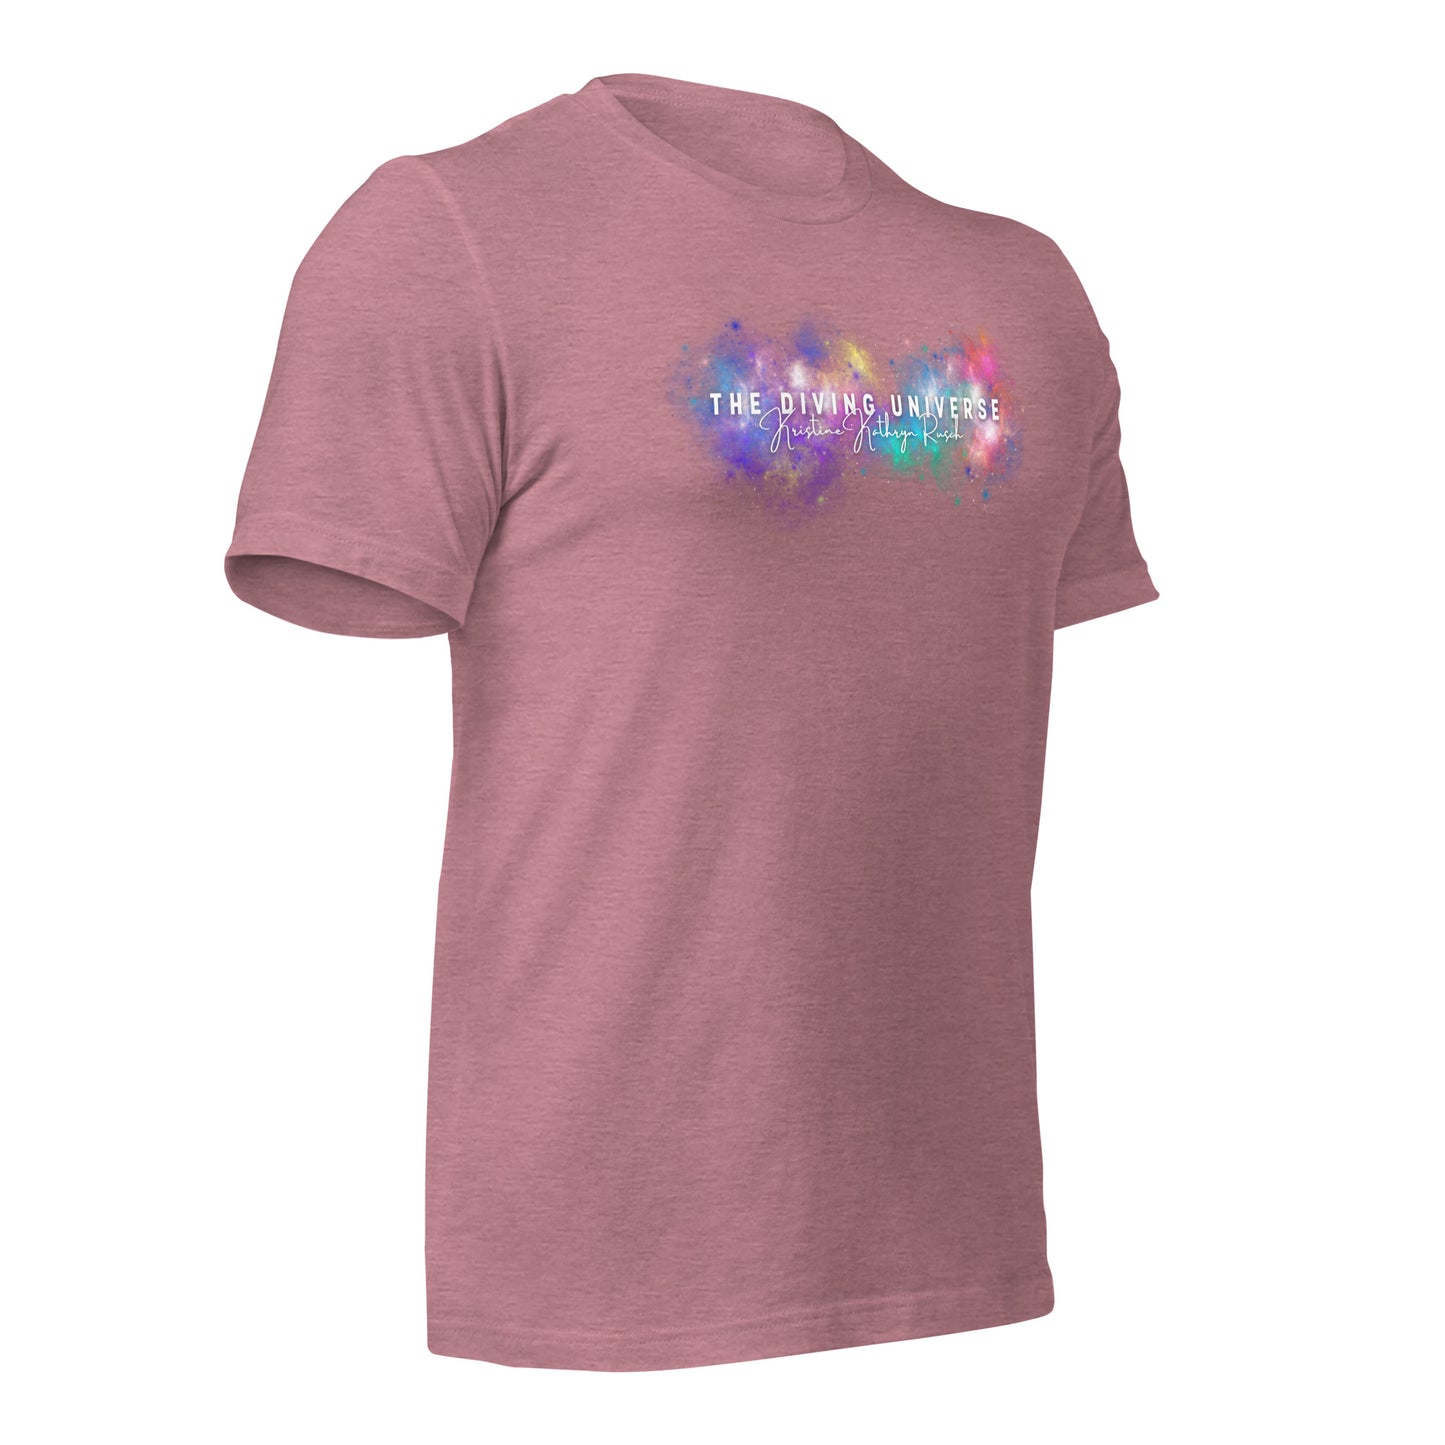 DIVING UNIVERSE NEBULA T-Shirt - The Diving Universe by Kristine Kathryn Rusch